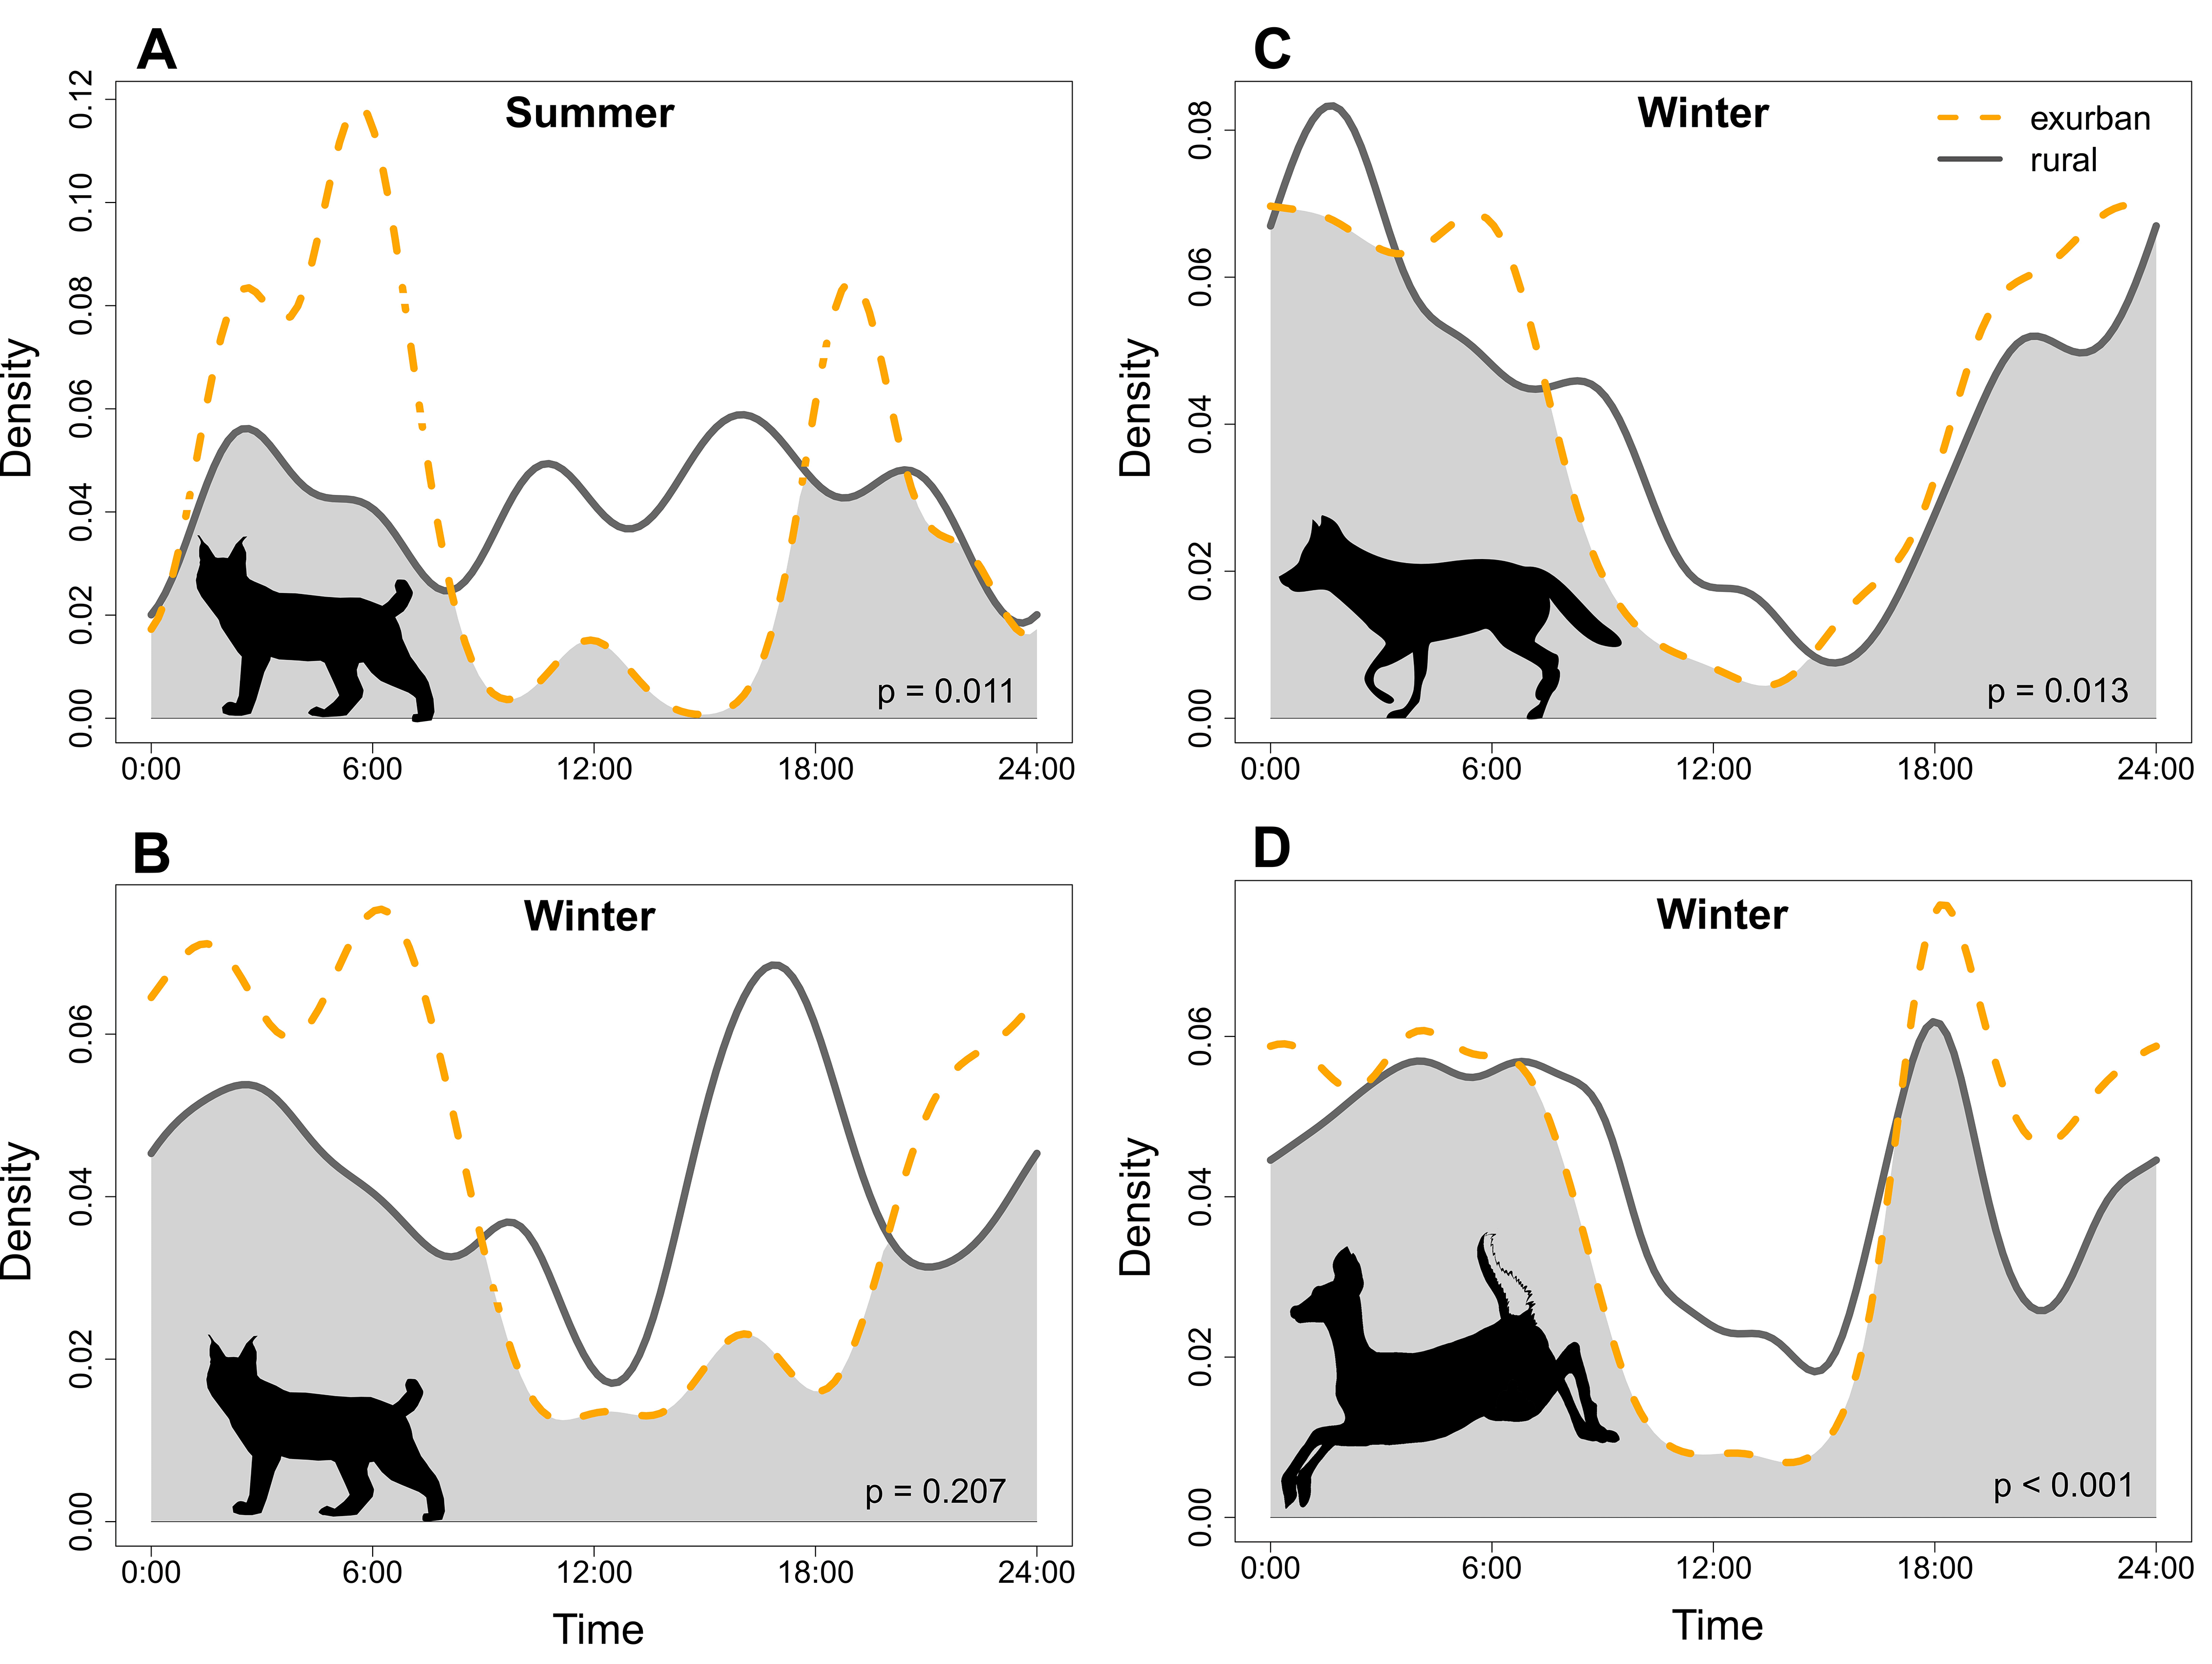 A graph showing different mammal densities at different times of the year.